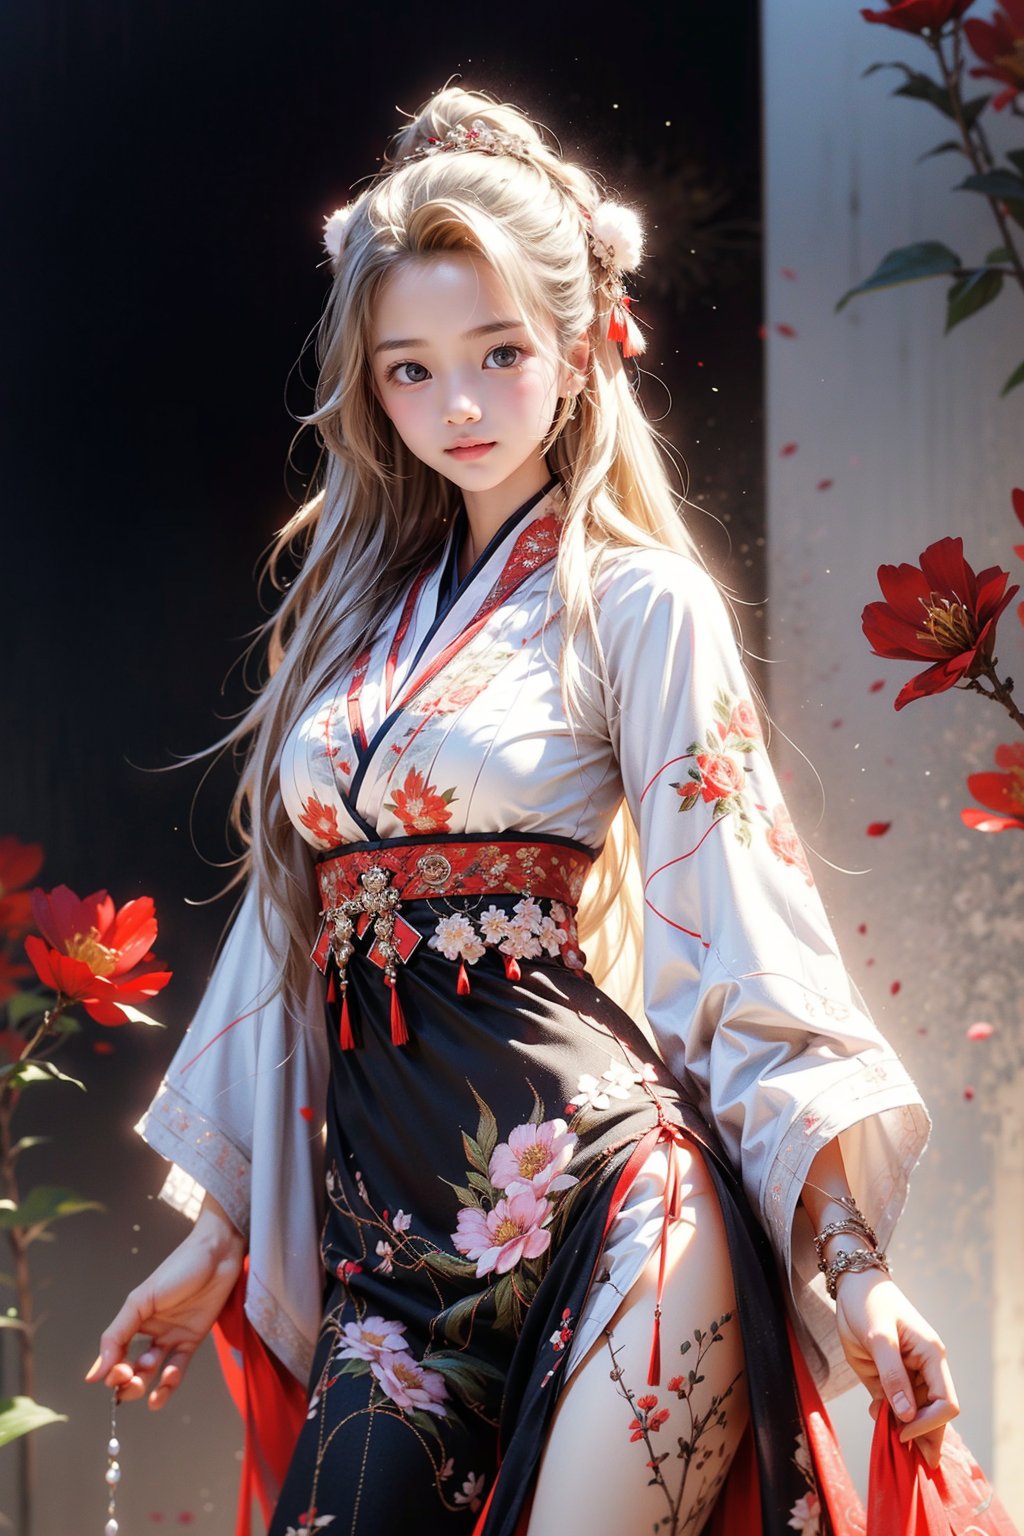 1 girl, most beautiful korean girl, Korean beauty model, idol face, gorgeous girl, 18yo, over sized eyes, big eyes, smiling, looking at viewer, ((Cowboy Shot: 1.5)), Full body, Best picture quality, high resolution, 16k, realistic, sharp focus, extreme picture quality, detailed face + eyes, casual pose, elegant, casual facial expression, realistic image of an elegant lady, no hair accessories, dark eyes , fractal art, bright colors, Korean beauty supermodel, pure white hair mixed with colorful hair tails, wearing Hanfu, wearing high-heeled sandals, radiant, perfectly customized gorgeous floral embroidery pattern suit, custom design, tense , looking at the audience, floral print, CLOUD